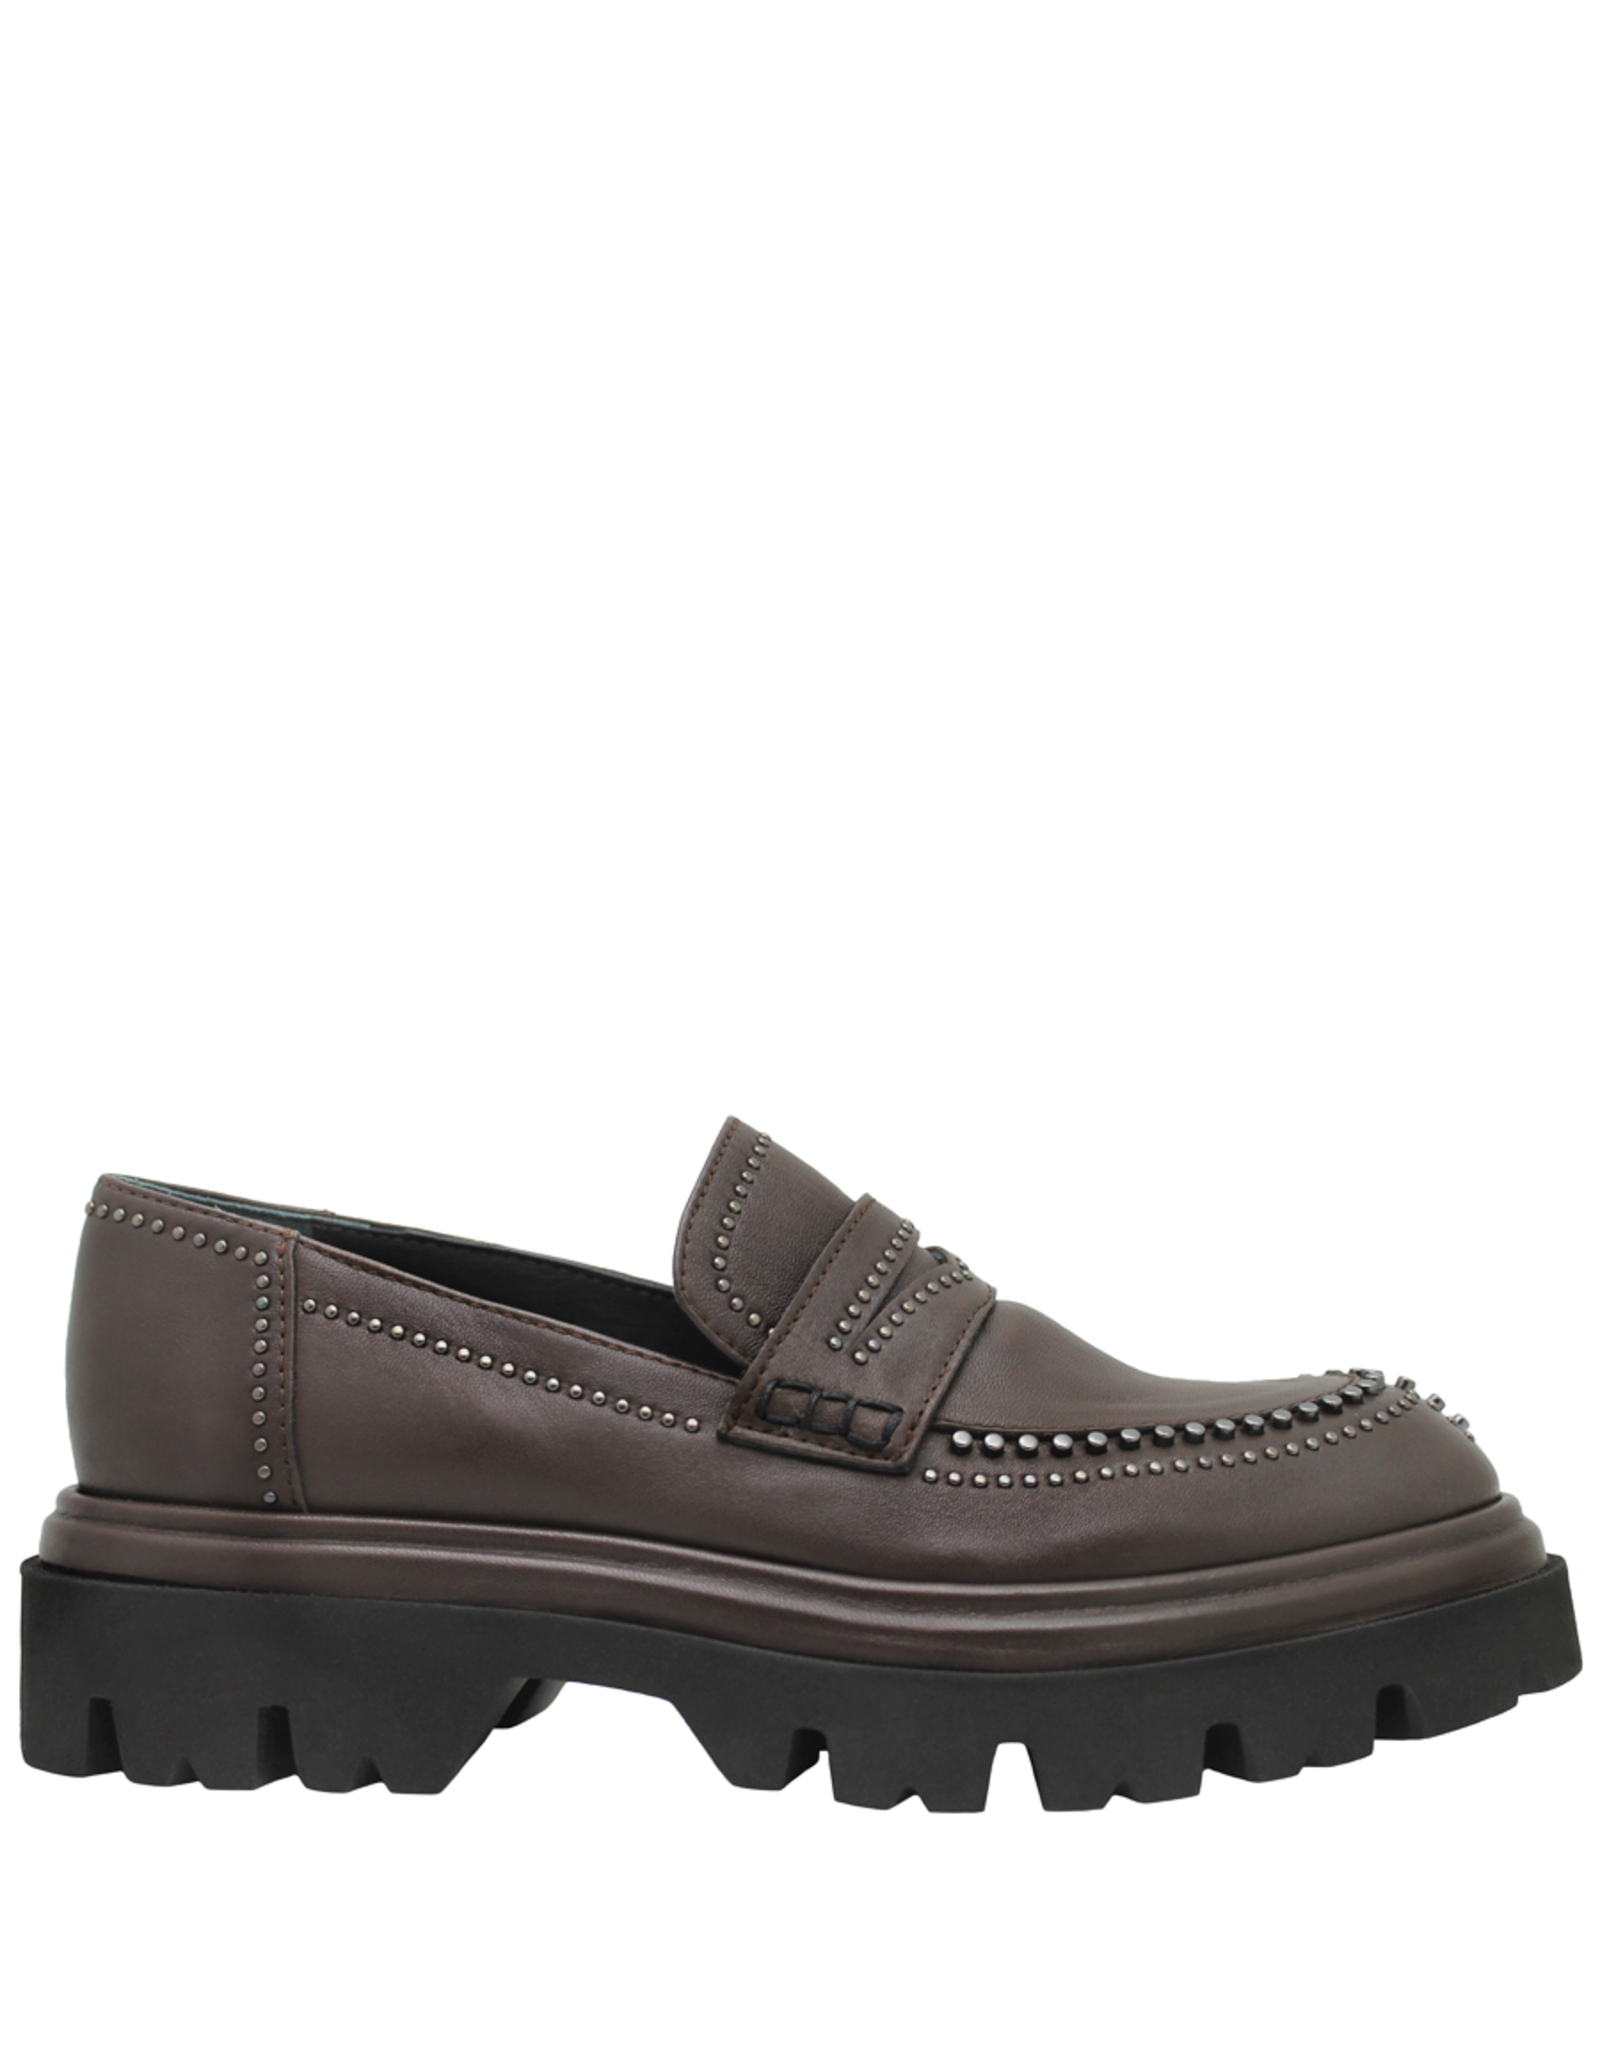 Now Now Brown Loafer Tread Sole 7237